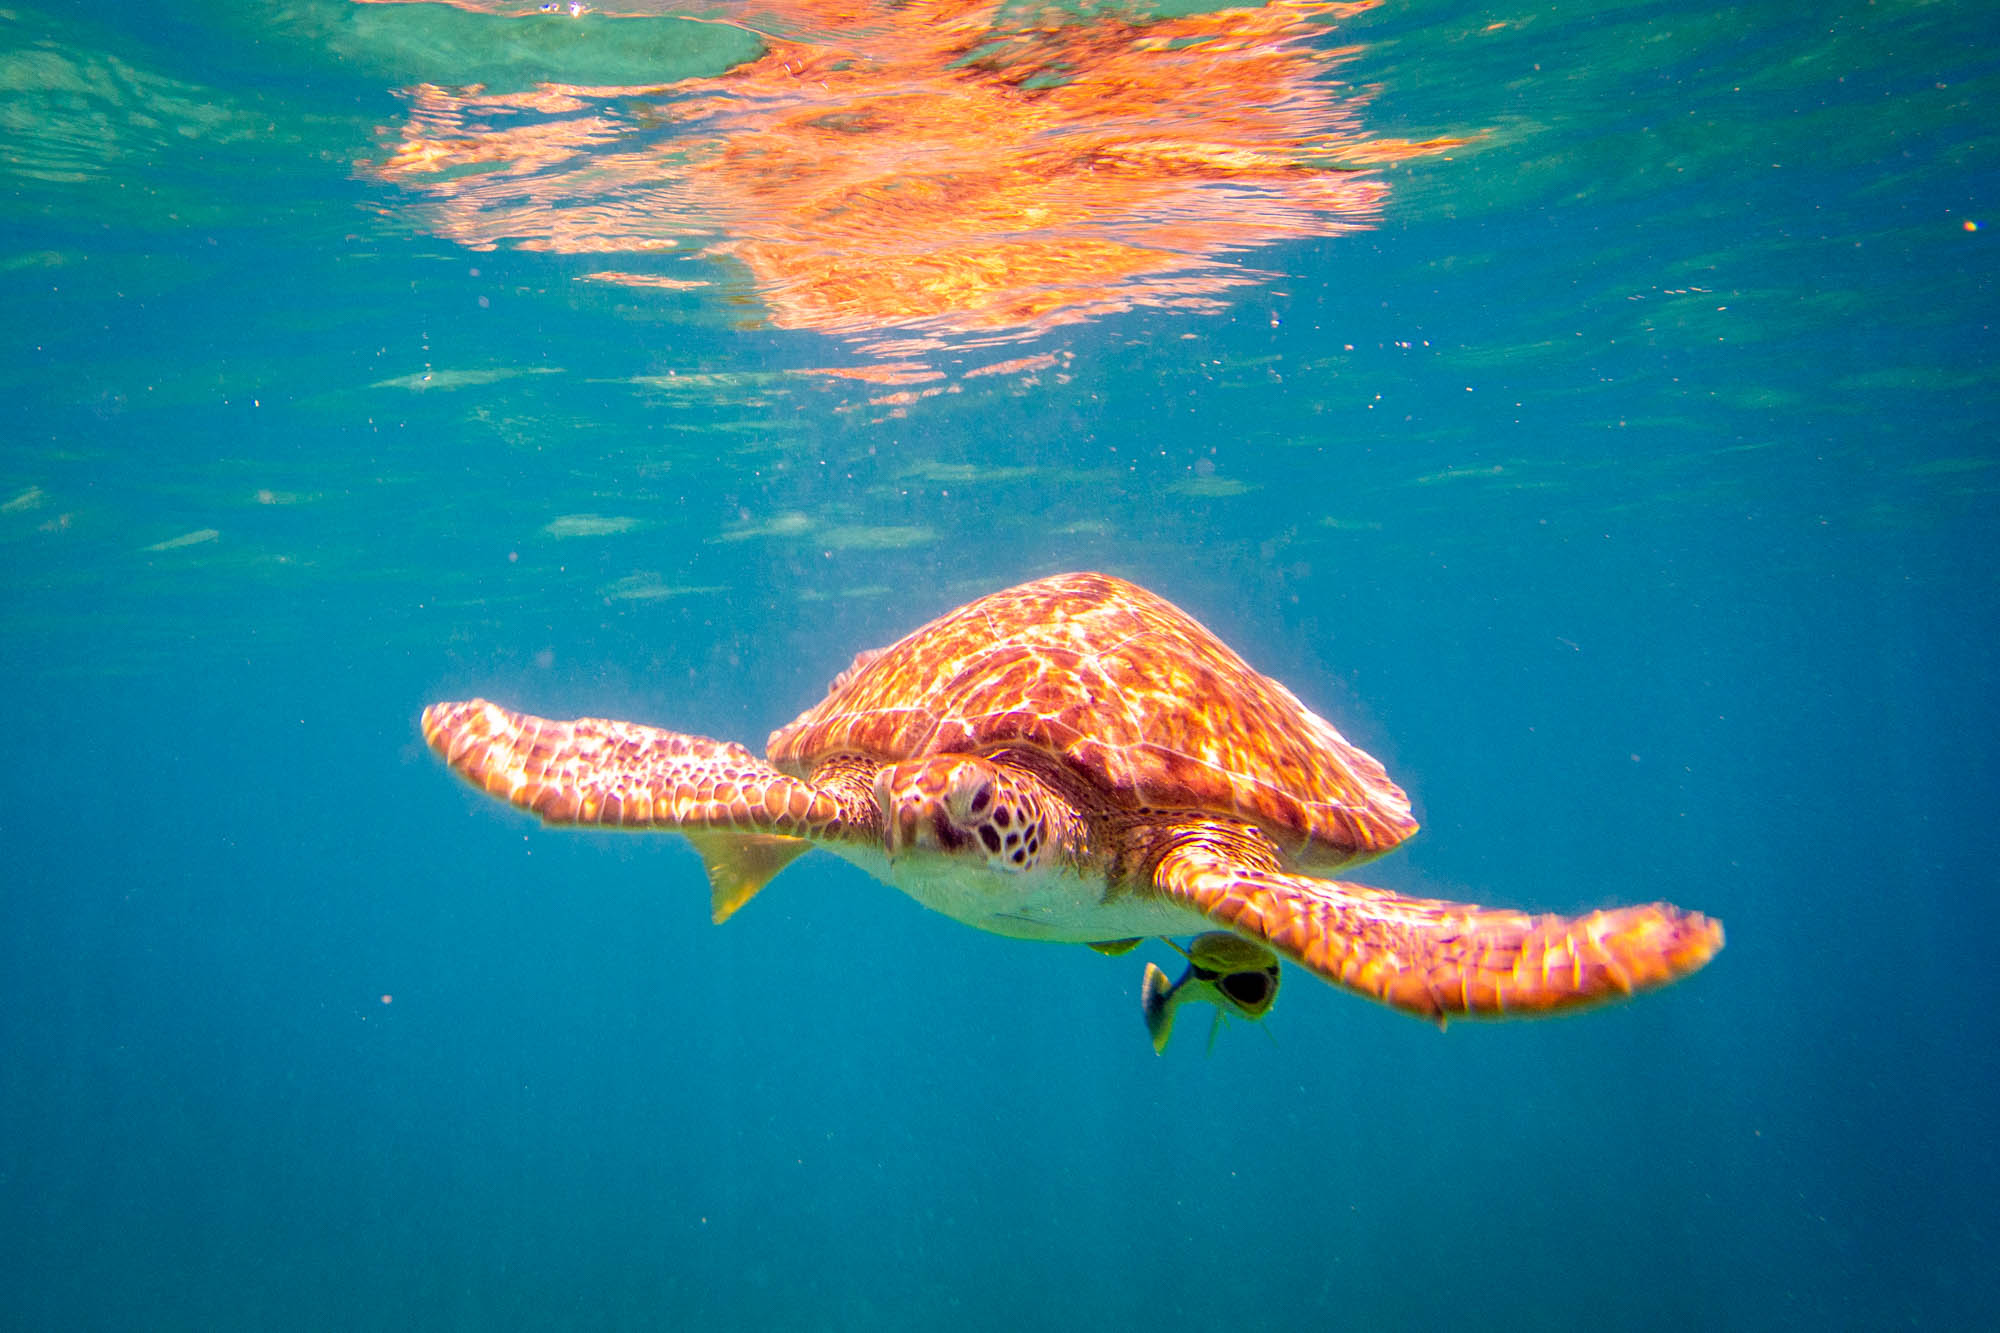 Close up of a sea turtle swimming in the ocean